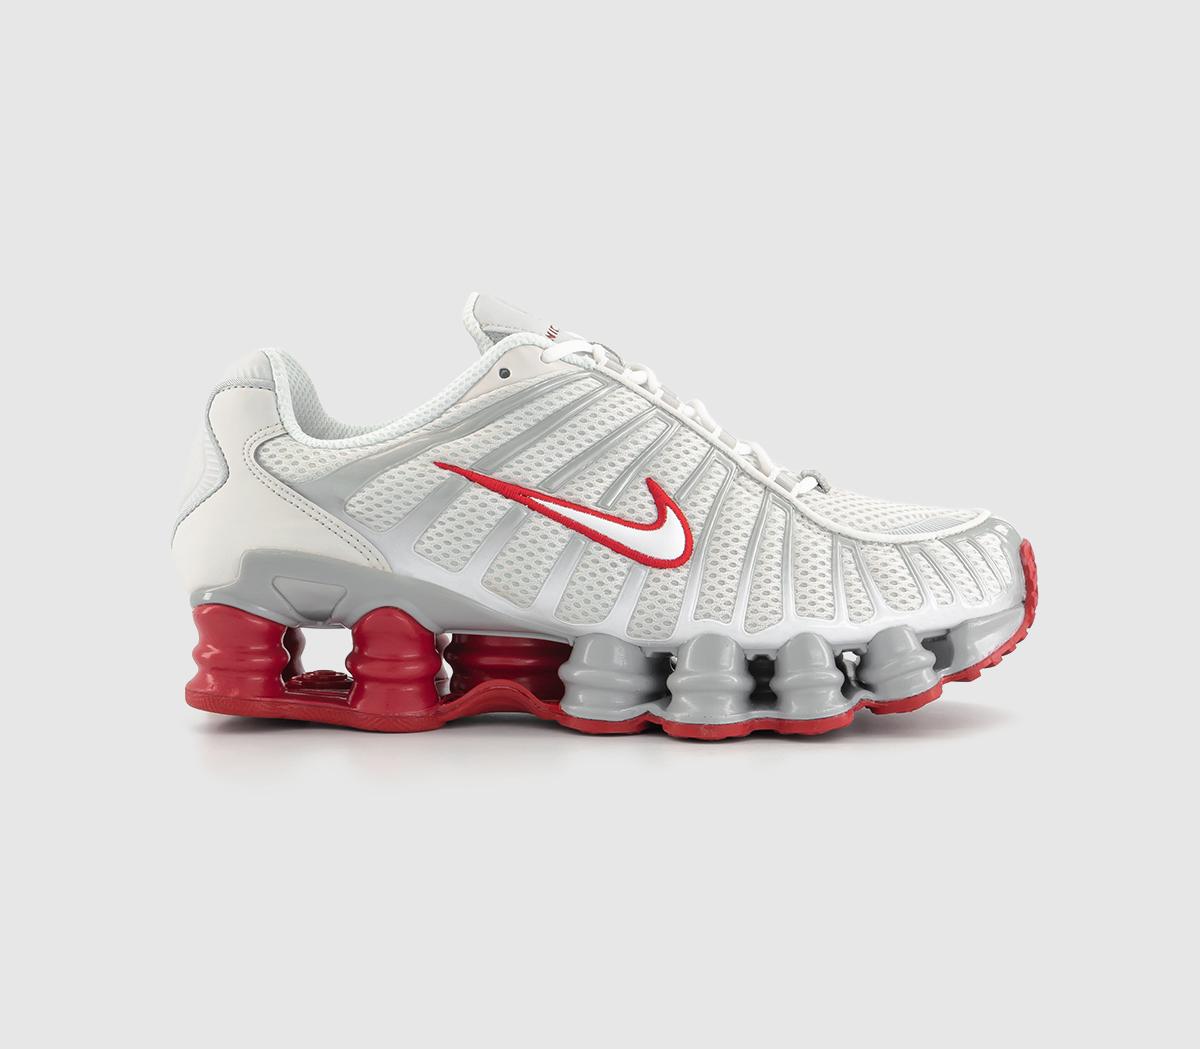 Nike Nike Shox TL Trainers Platinum Tint White Gym Red - Women's Trainers